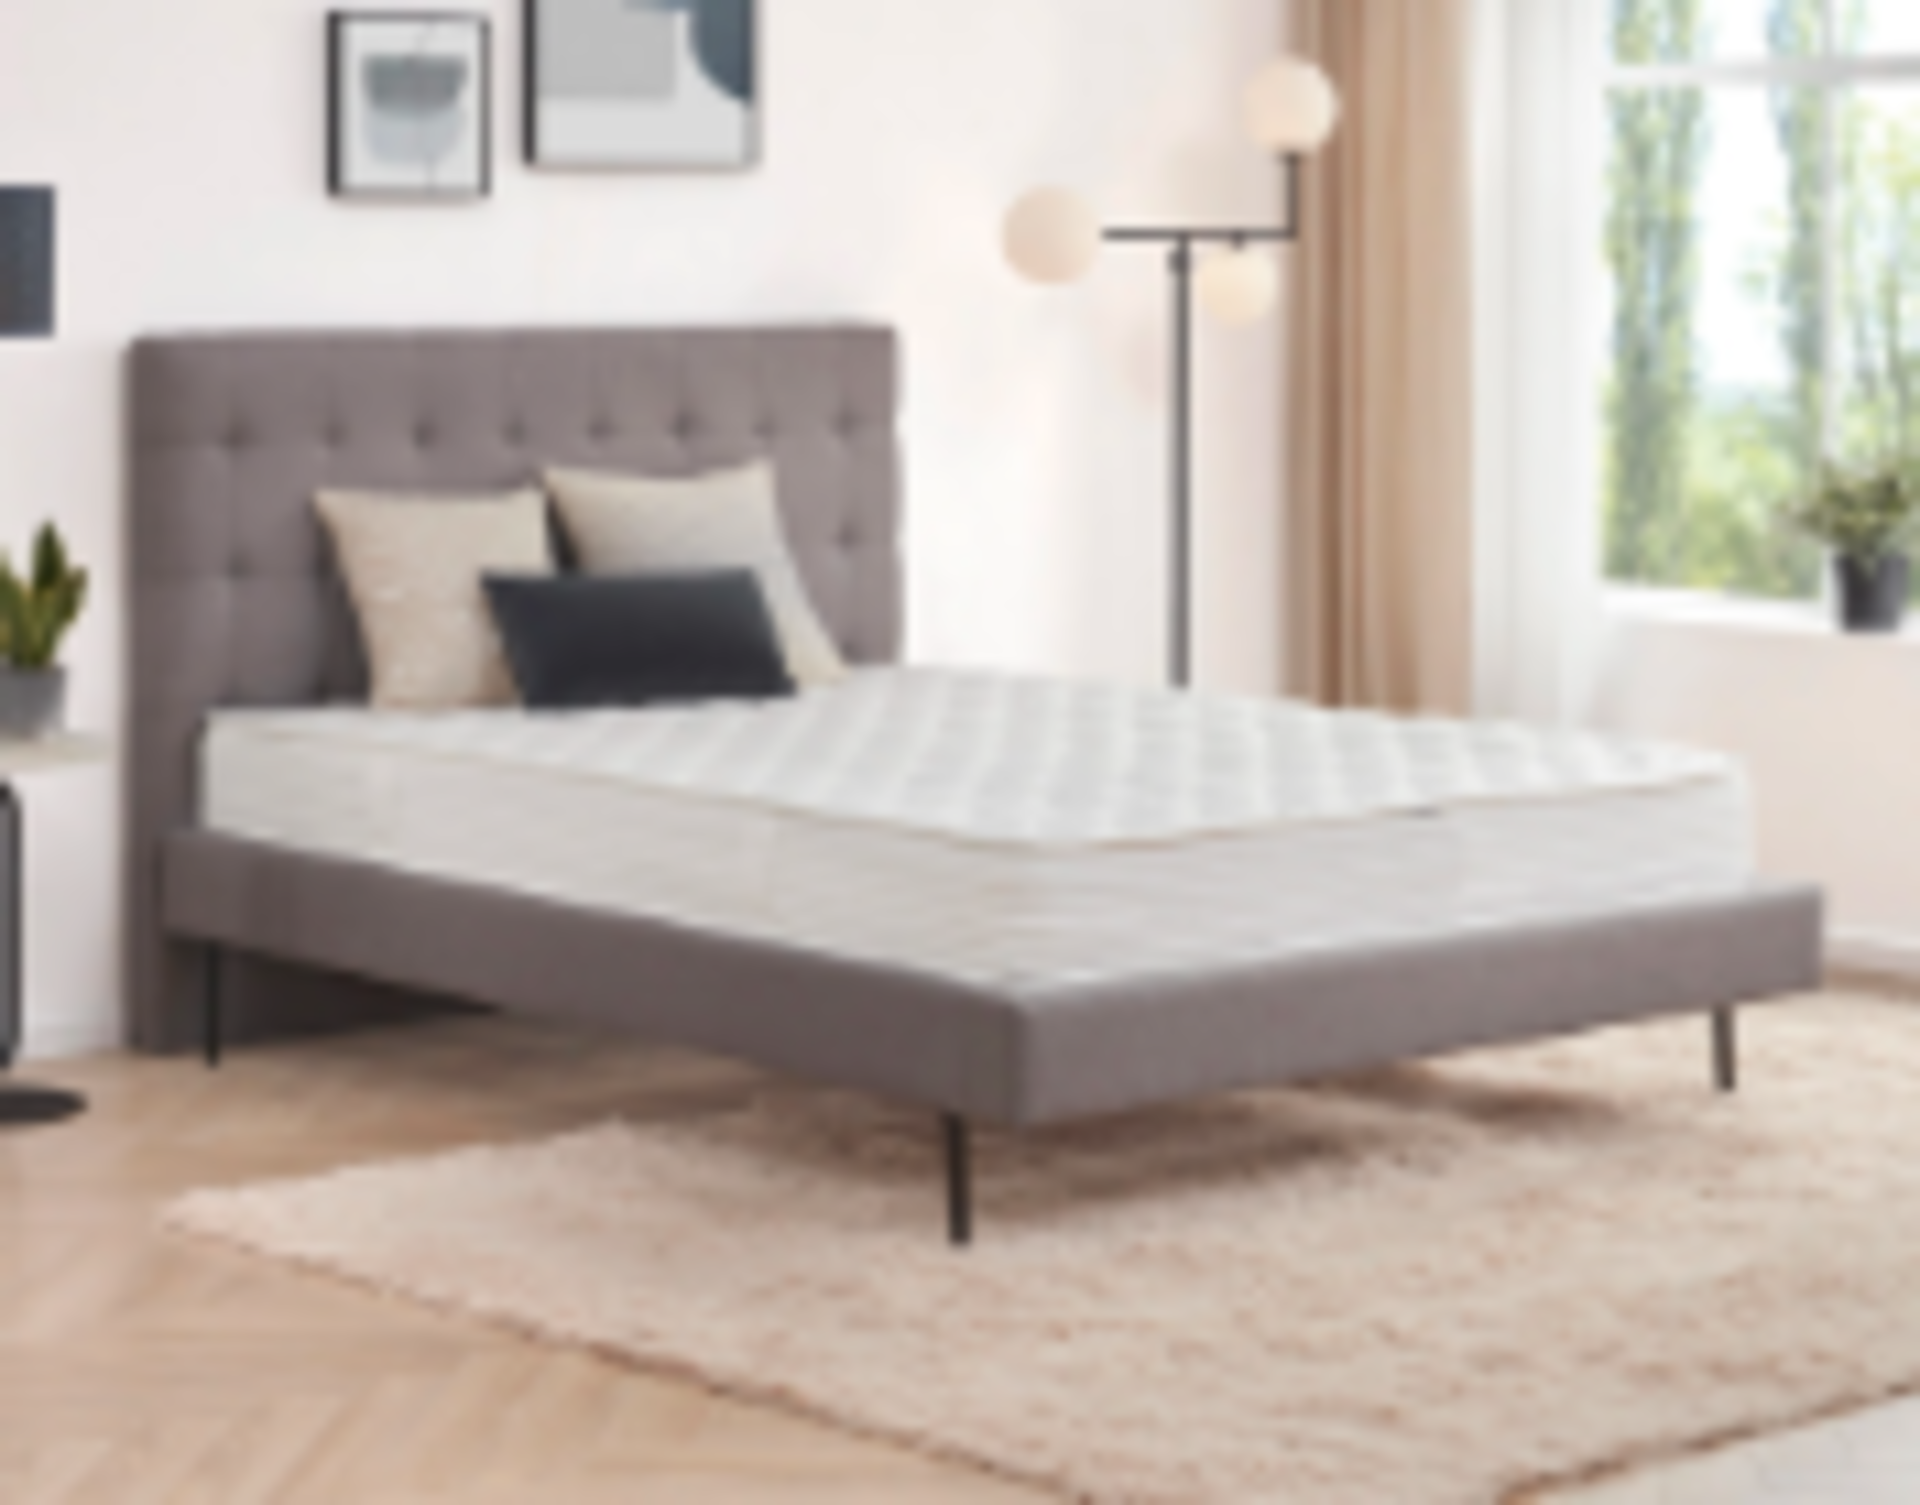 RRP 182 Bdeus Hybrid Pocket Sprung Mattress Size: Kingsize (5') (Condition Reports Available On